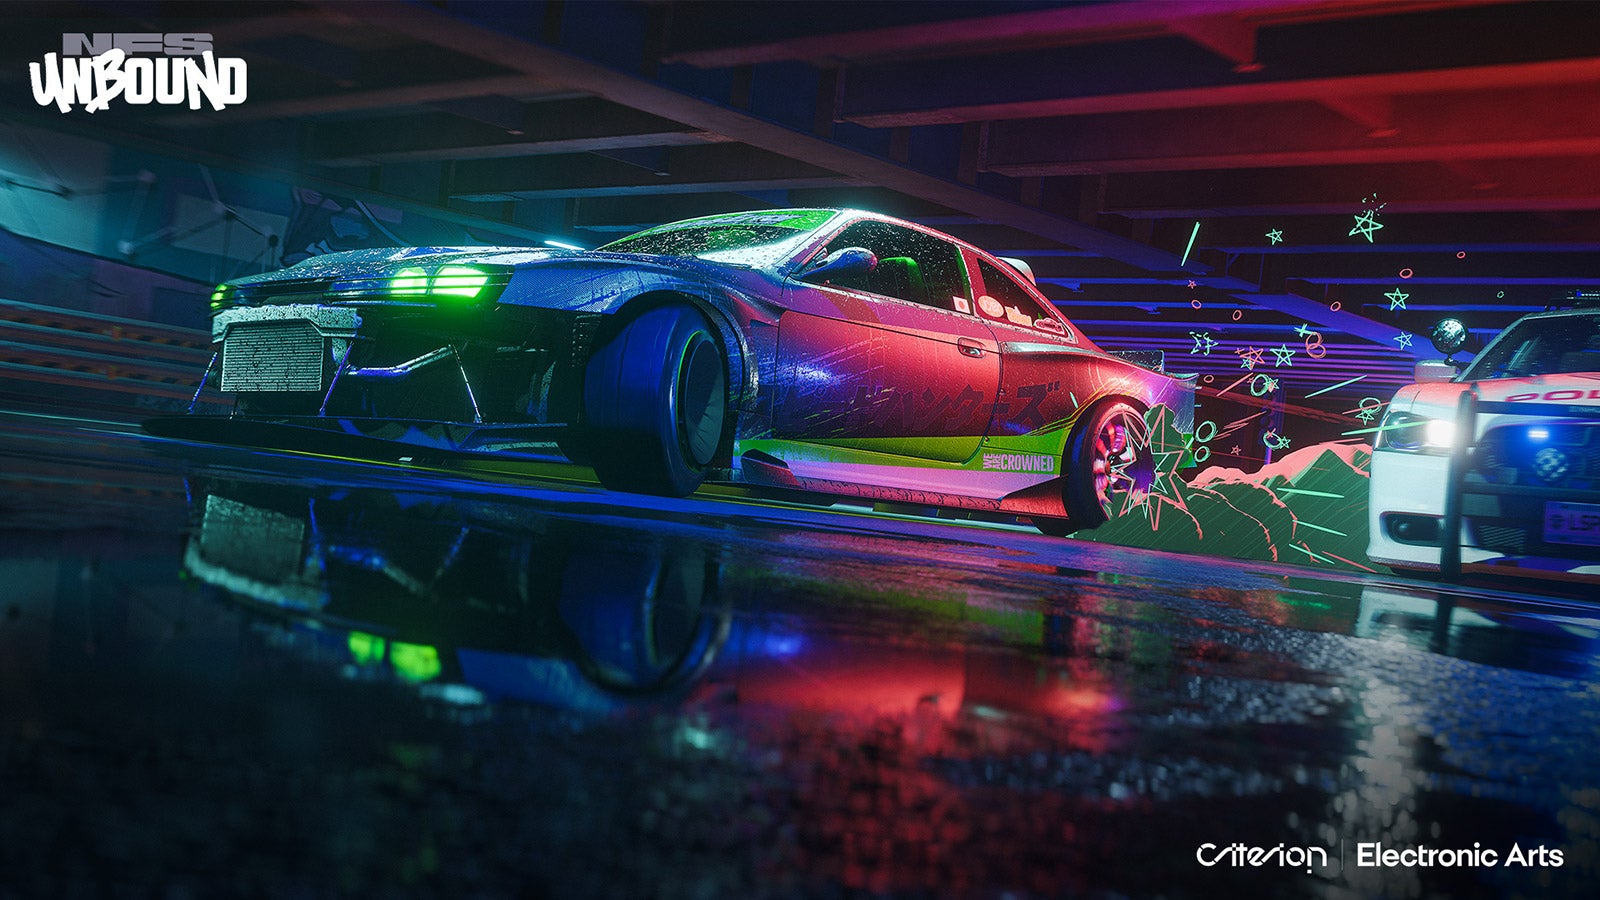 Need for Speed Unbound Chases Those Underground Vibes With a Divisive New Look